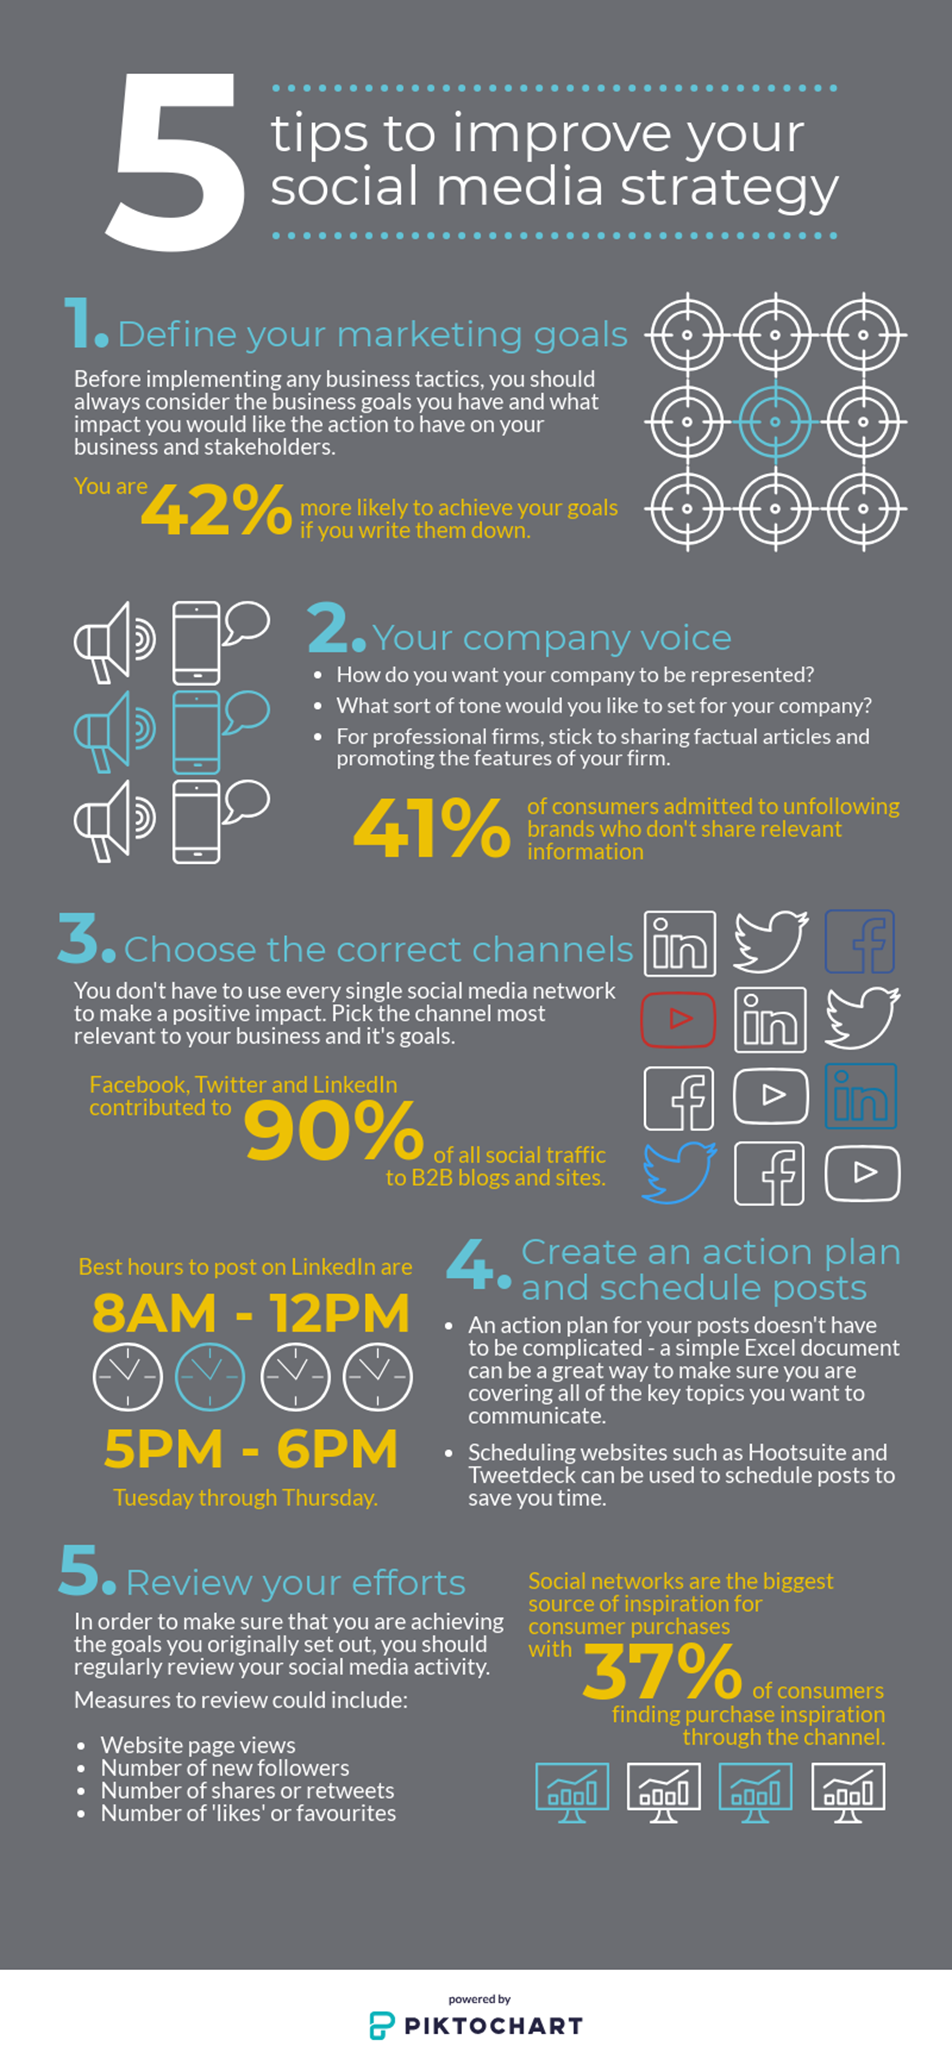 infographic of 5 tips to improve social media strategy